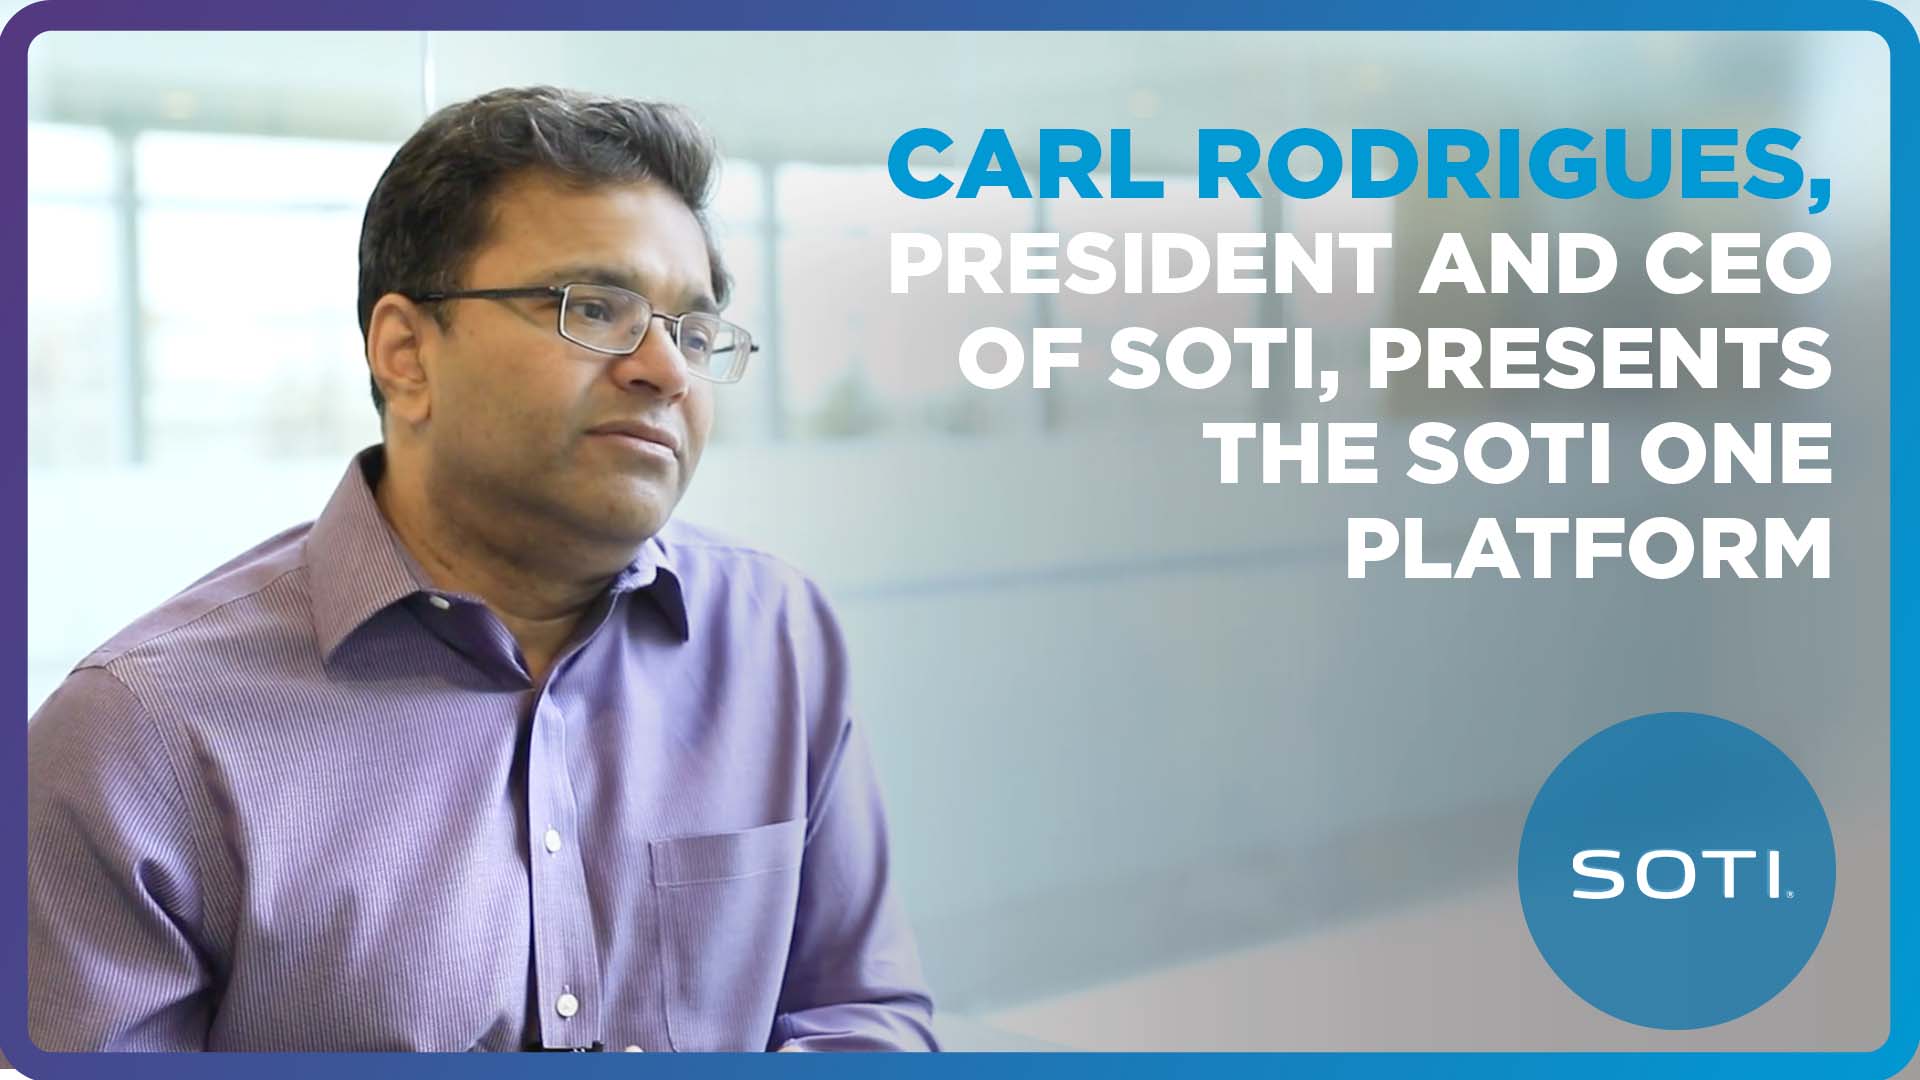 Video of Carl Rodrigues, President and CEO of SOTI, Presenting the Plataforma SOTI ONE